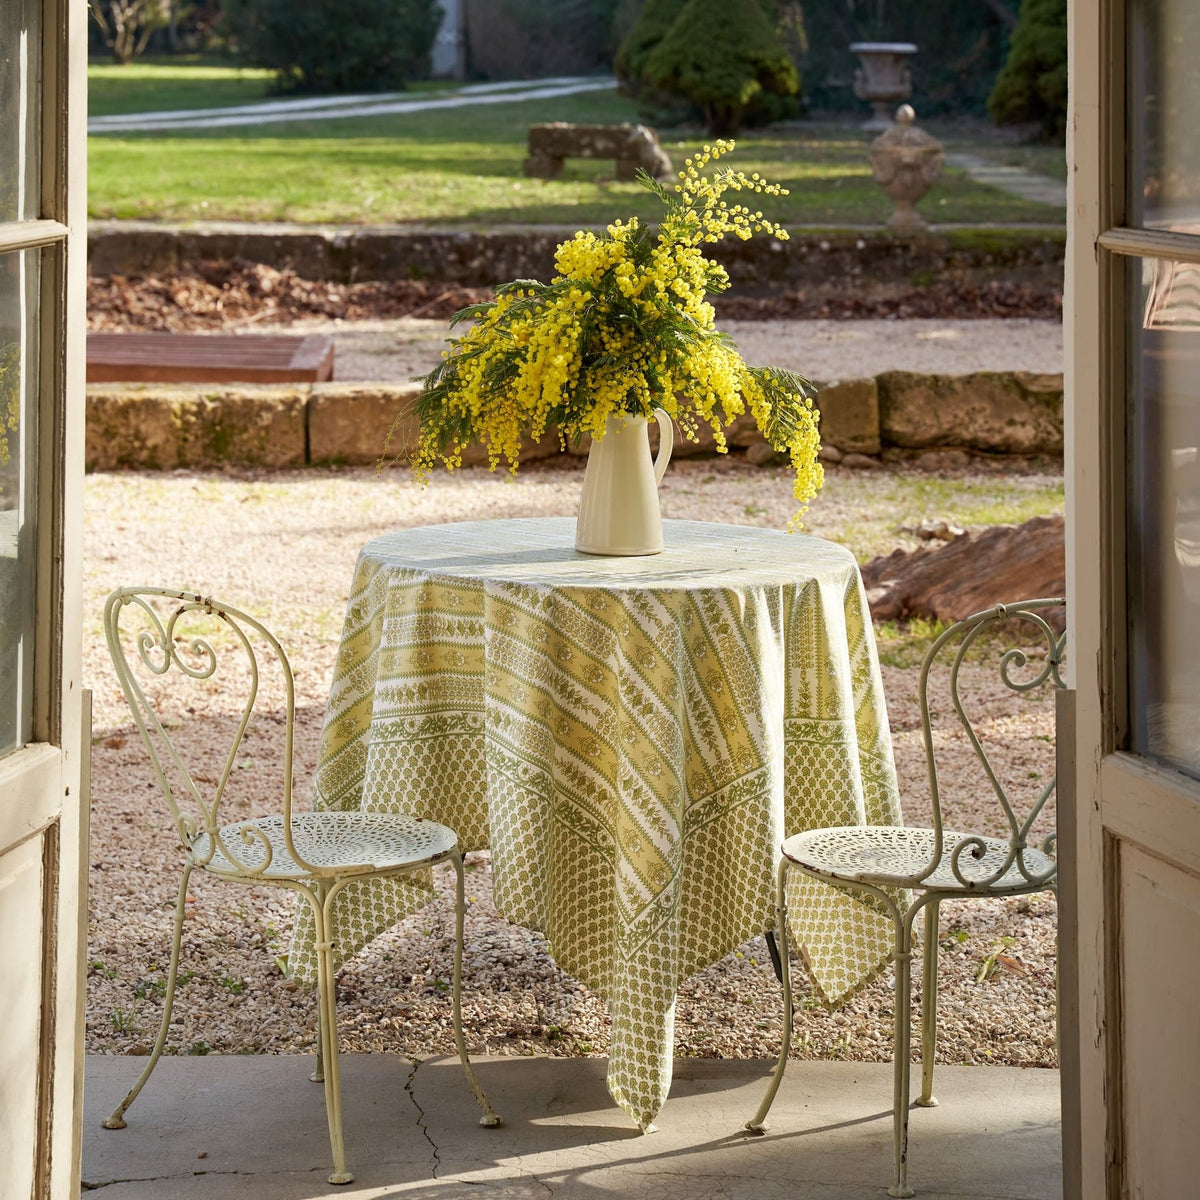 Handmade French Tablecloth Olive Floral